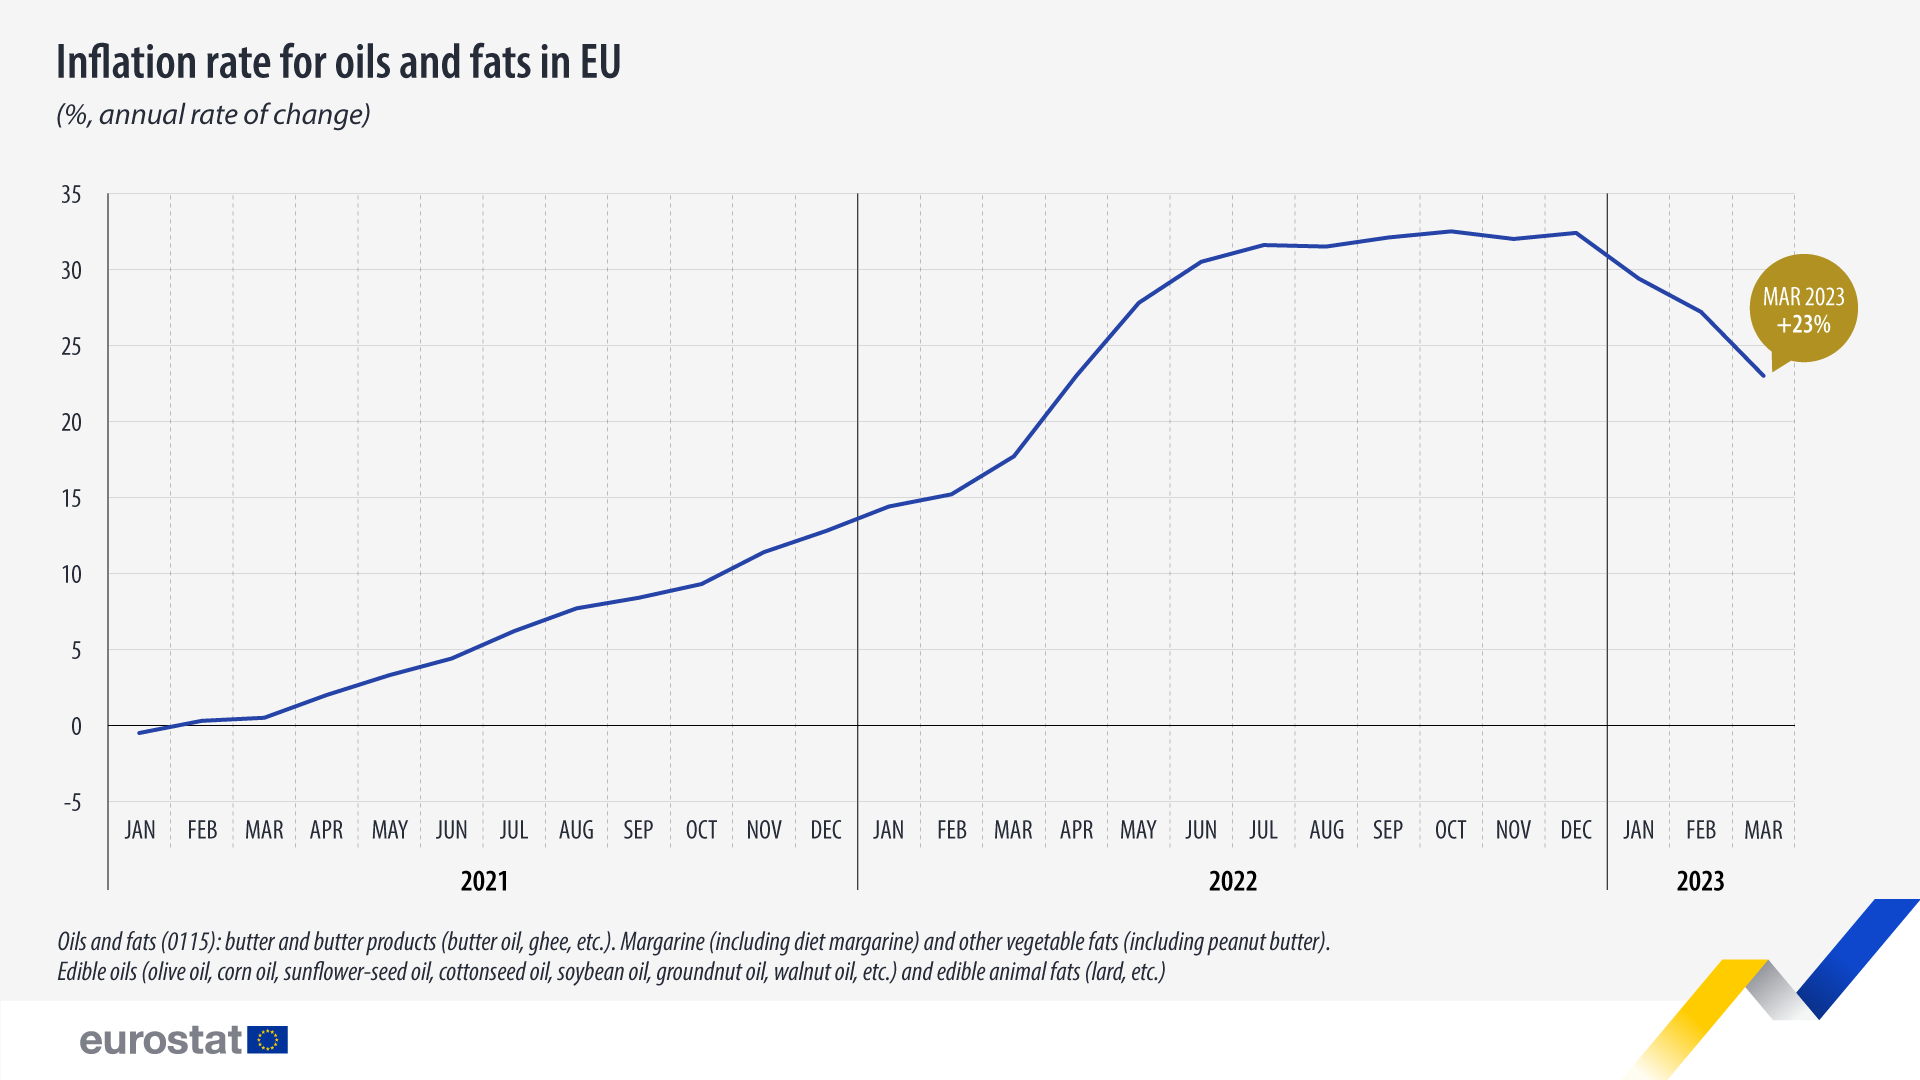 Line graph: Inflation rate for oils and fats in EU, %, annual rate of change